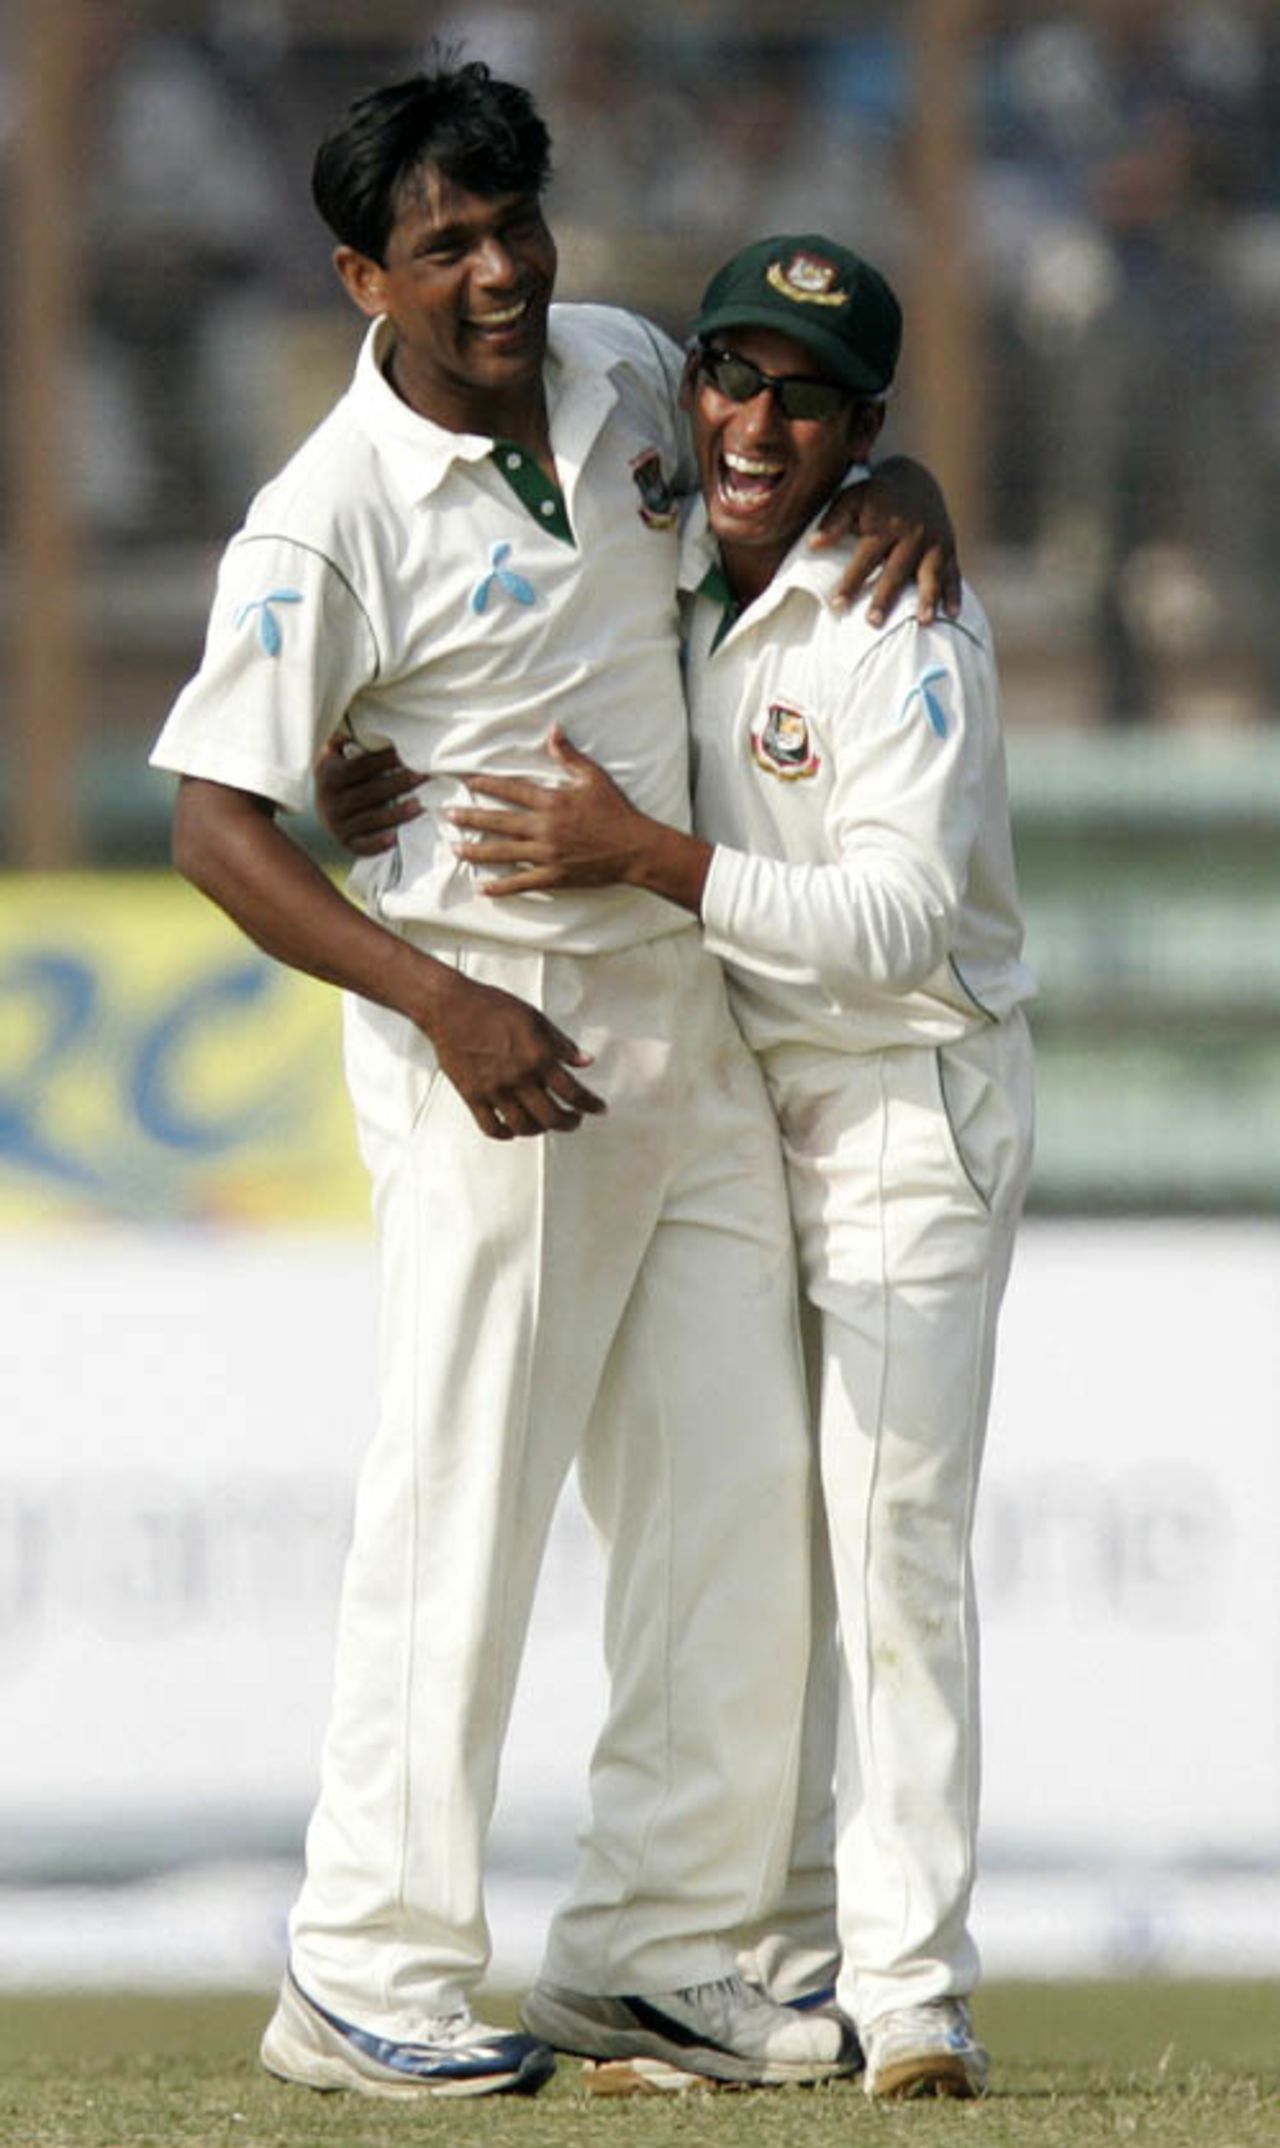 Mohammad Rafique is congratulated by Mohammad Ashraful on his 100th Test wicket, Bangladesh v South Africa, 2nd Test, Chittagong, 2nd day, March 1, 2008